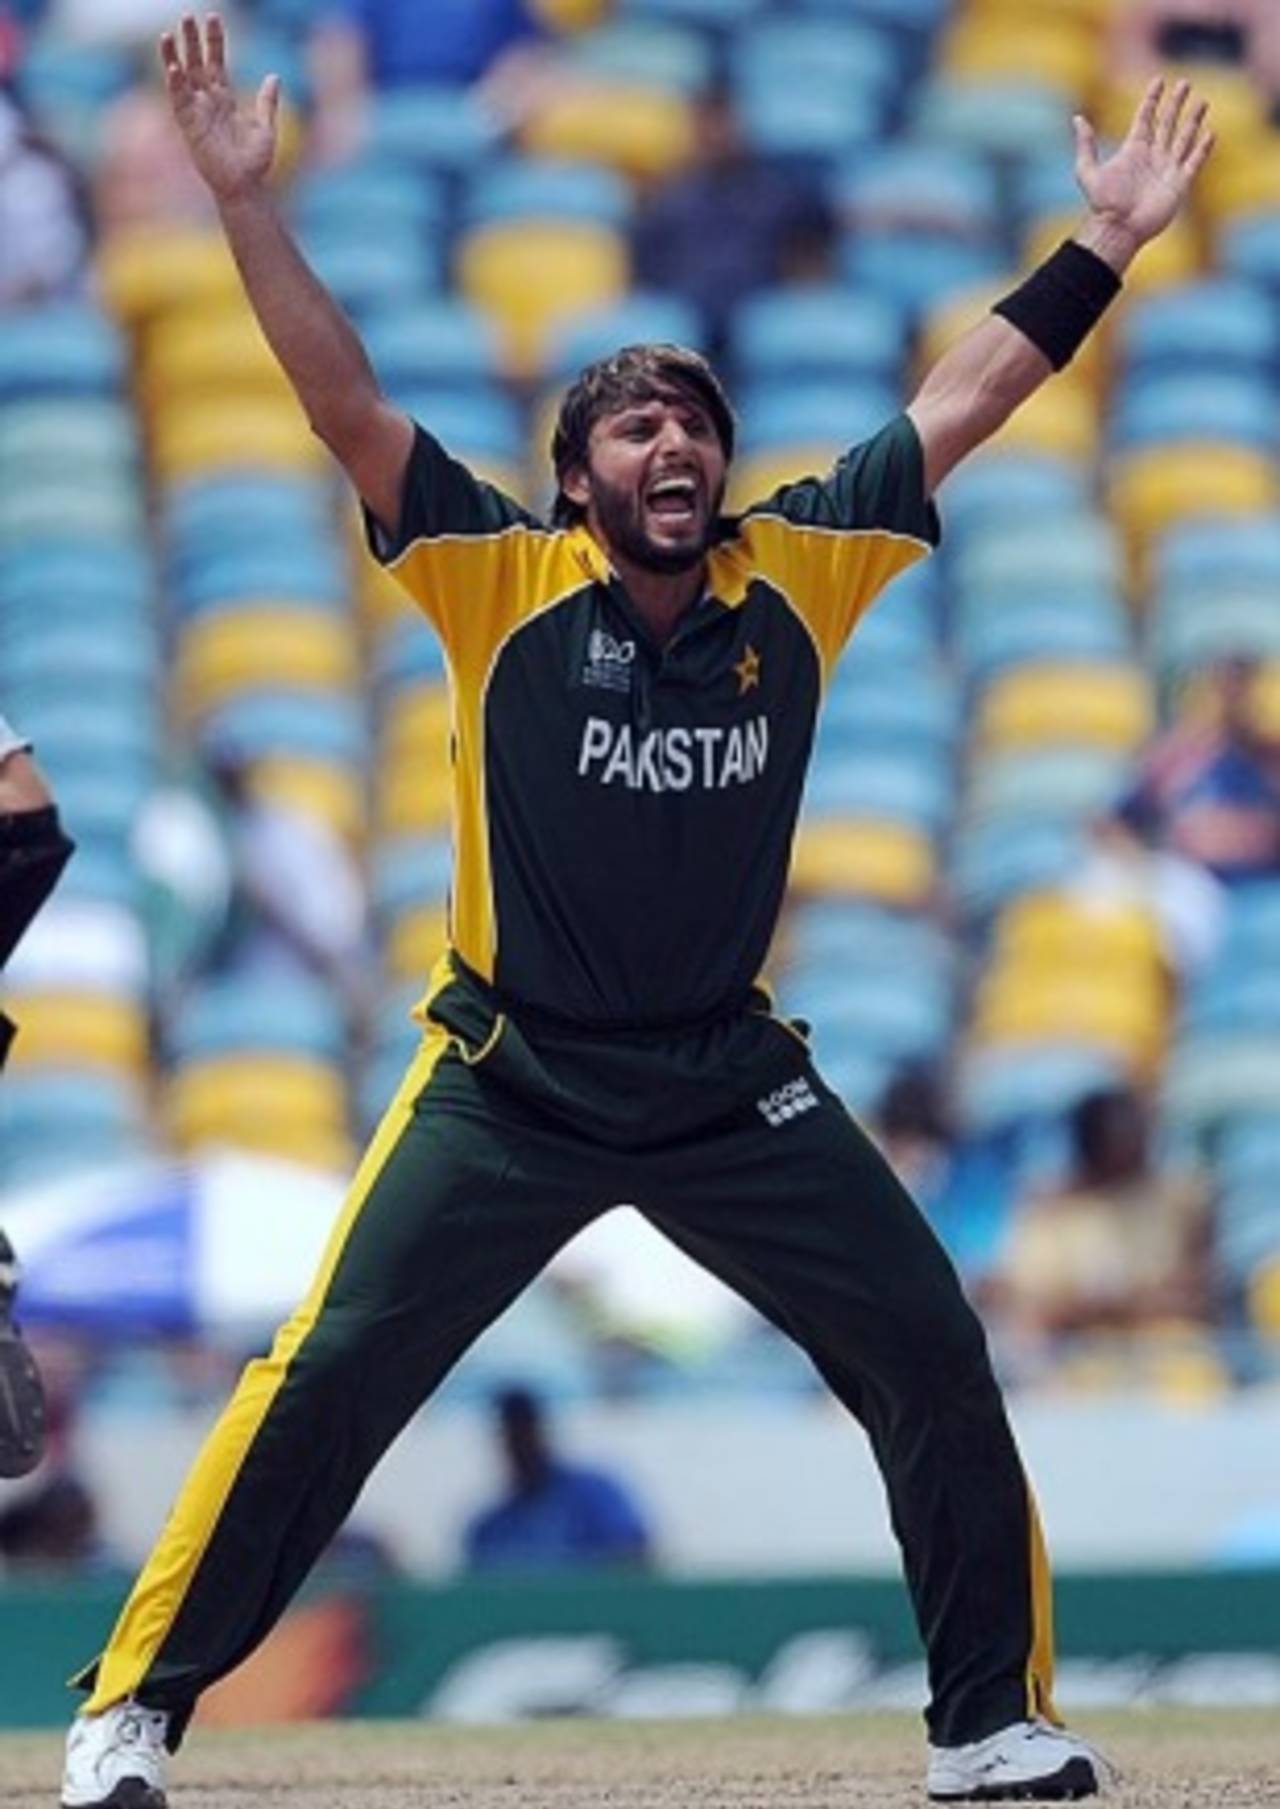 Shahid Afridi finished with figures of 2 for 29, New Zealand v Pakistan, Super Eights, Group E, World Twenty20, Barbados, May 8, 2010

